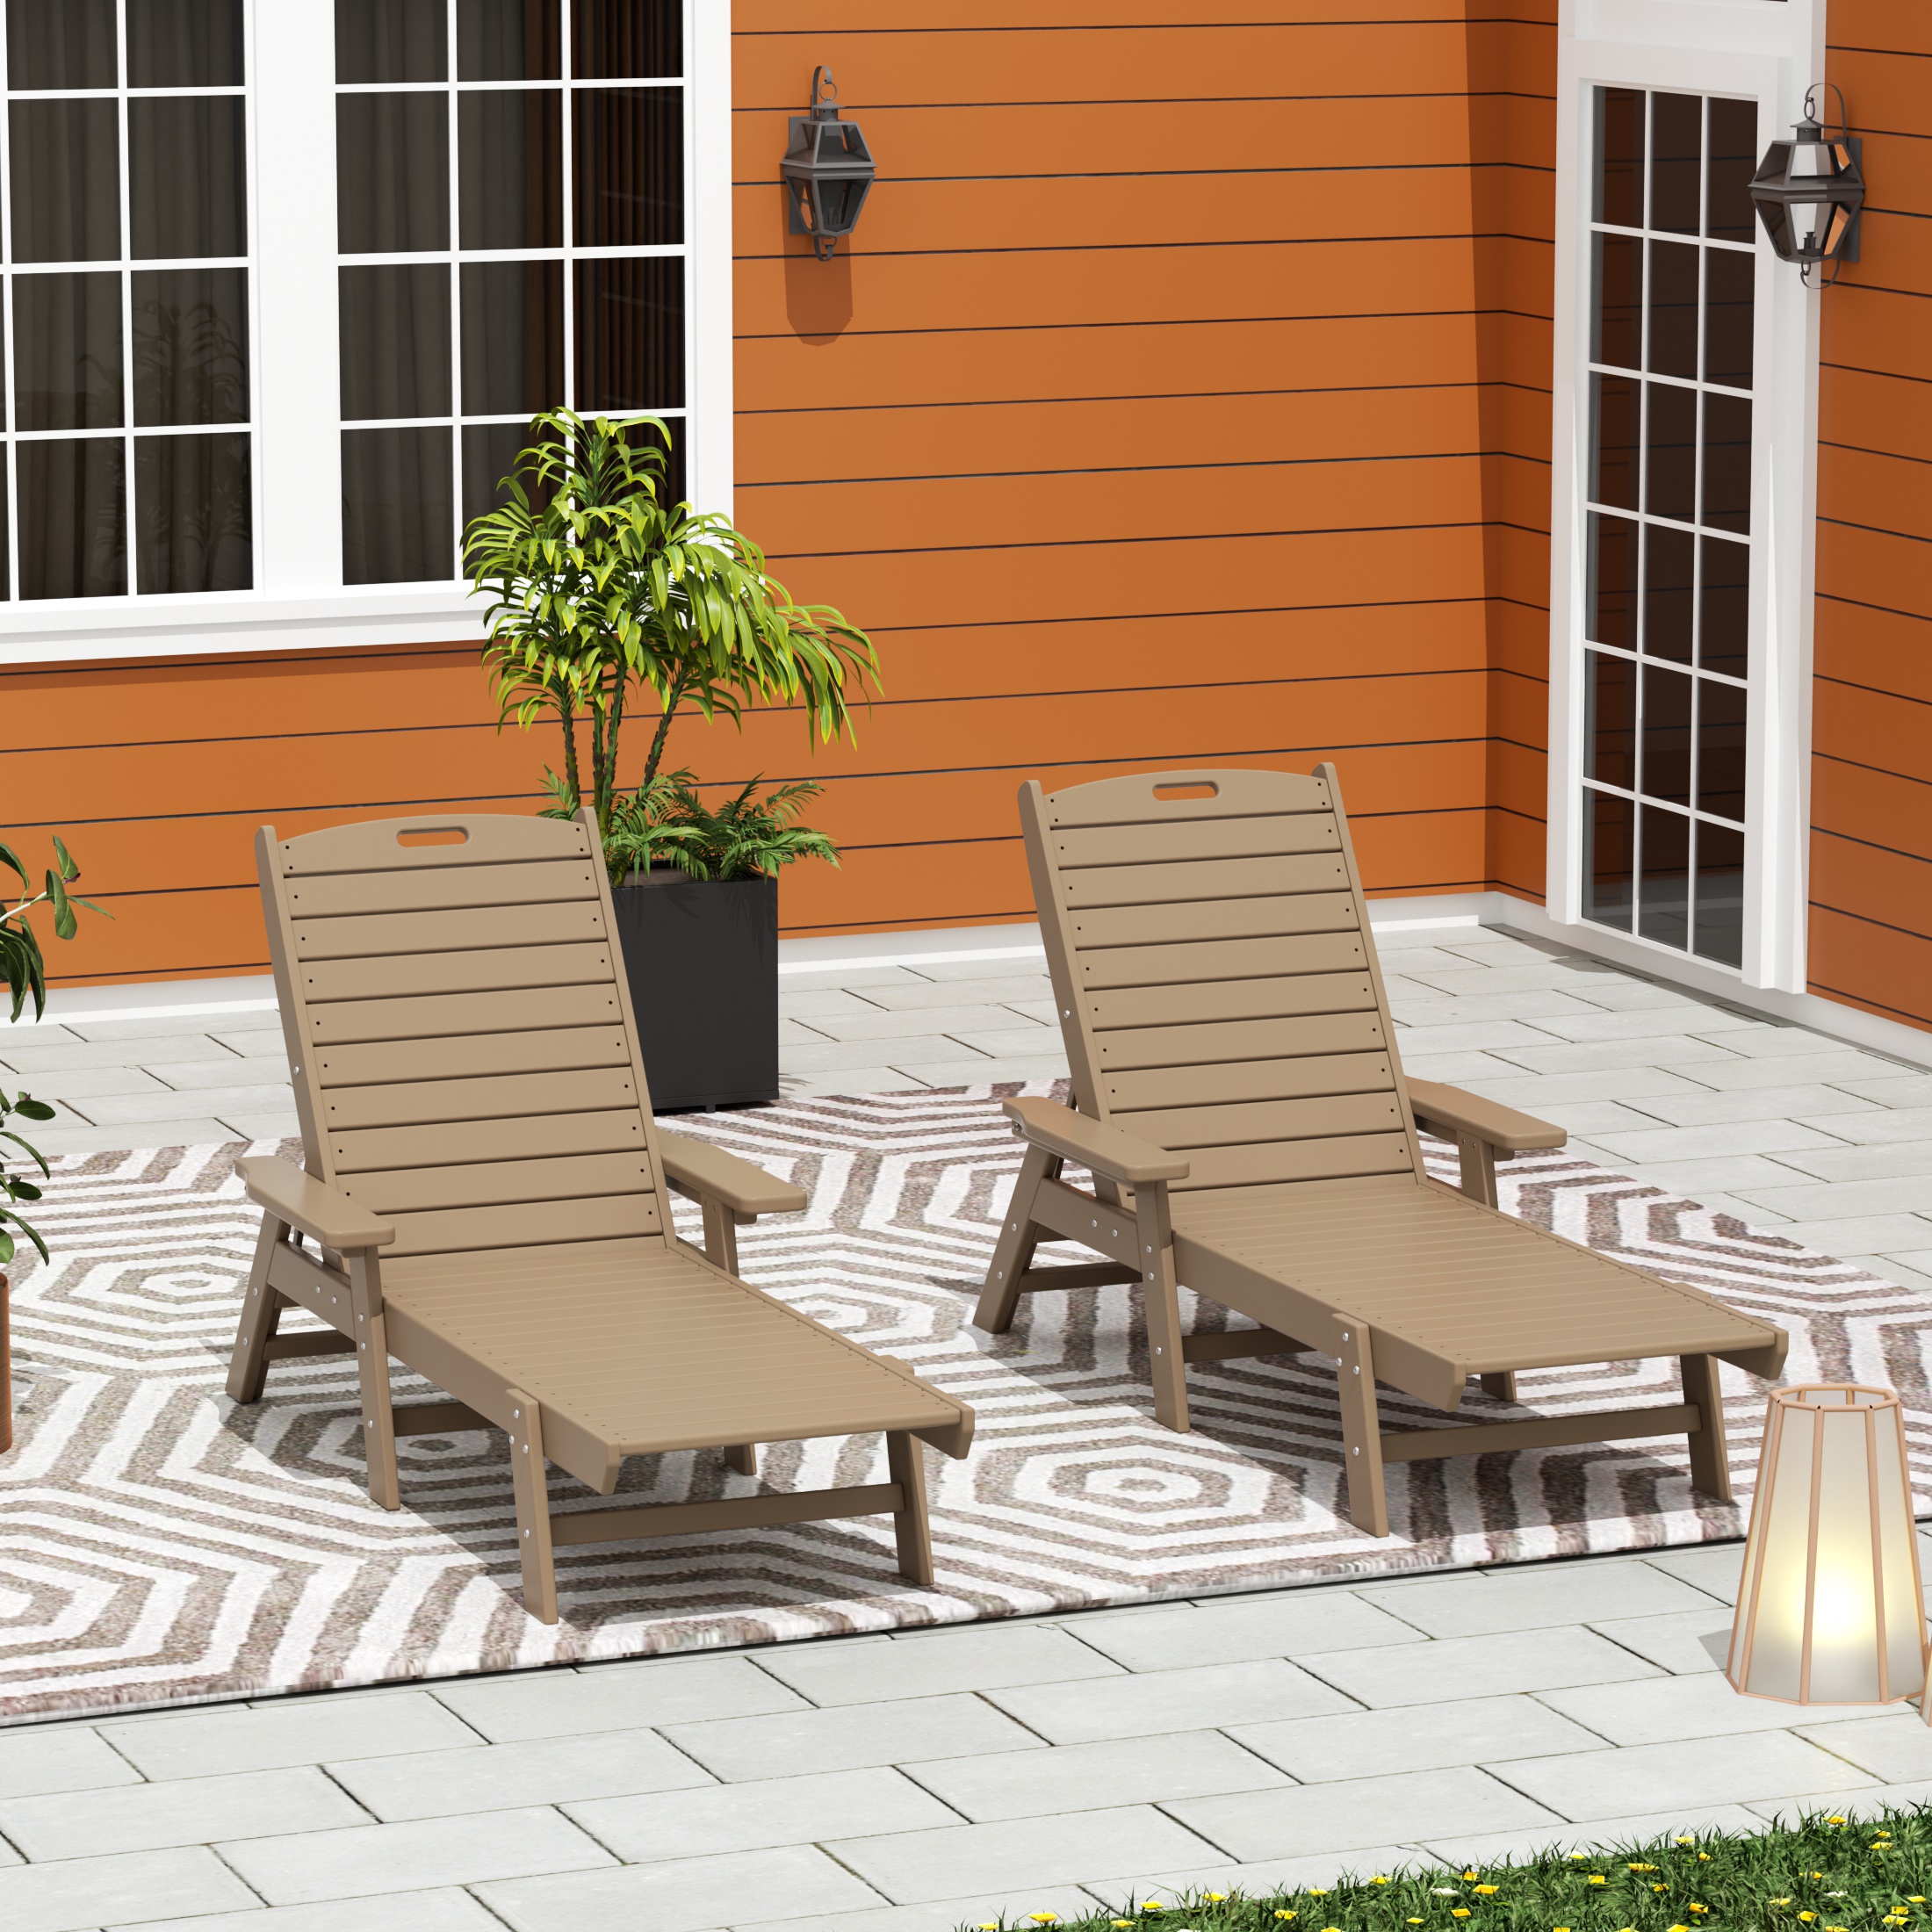 GARDEN Set of 2 Patio Outdoor Chaise Lounge Chair, Weathered Wood - image 1 of 8